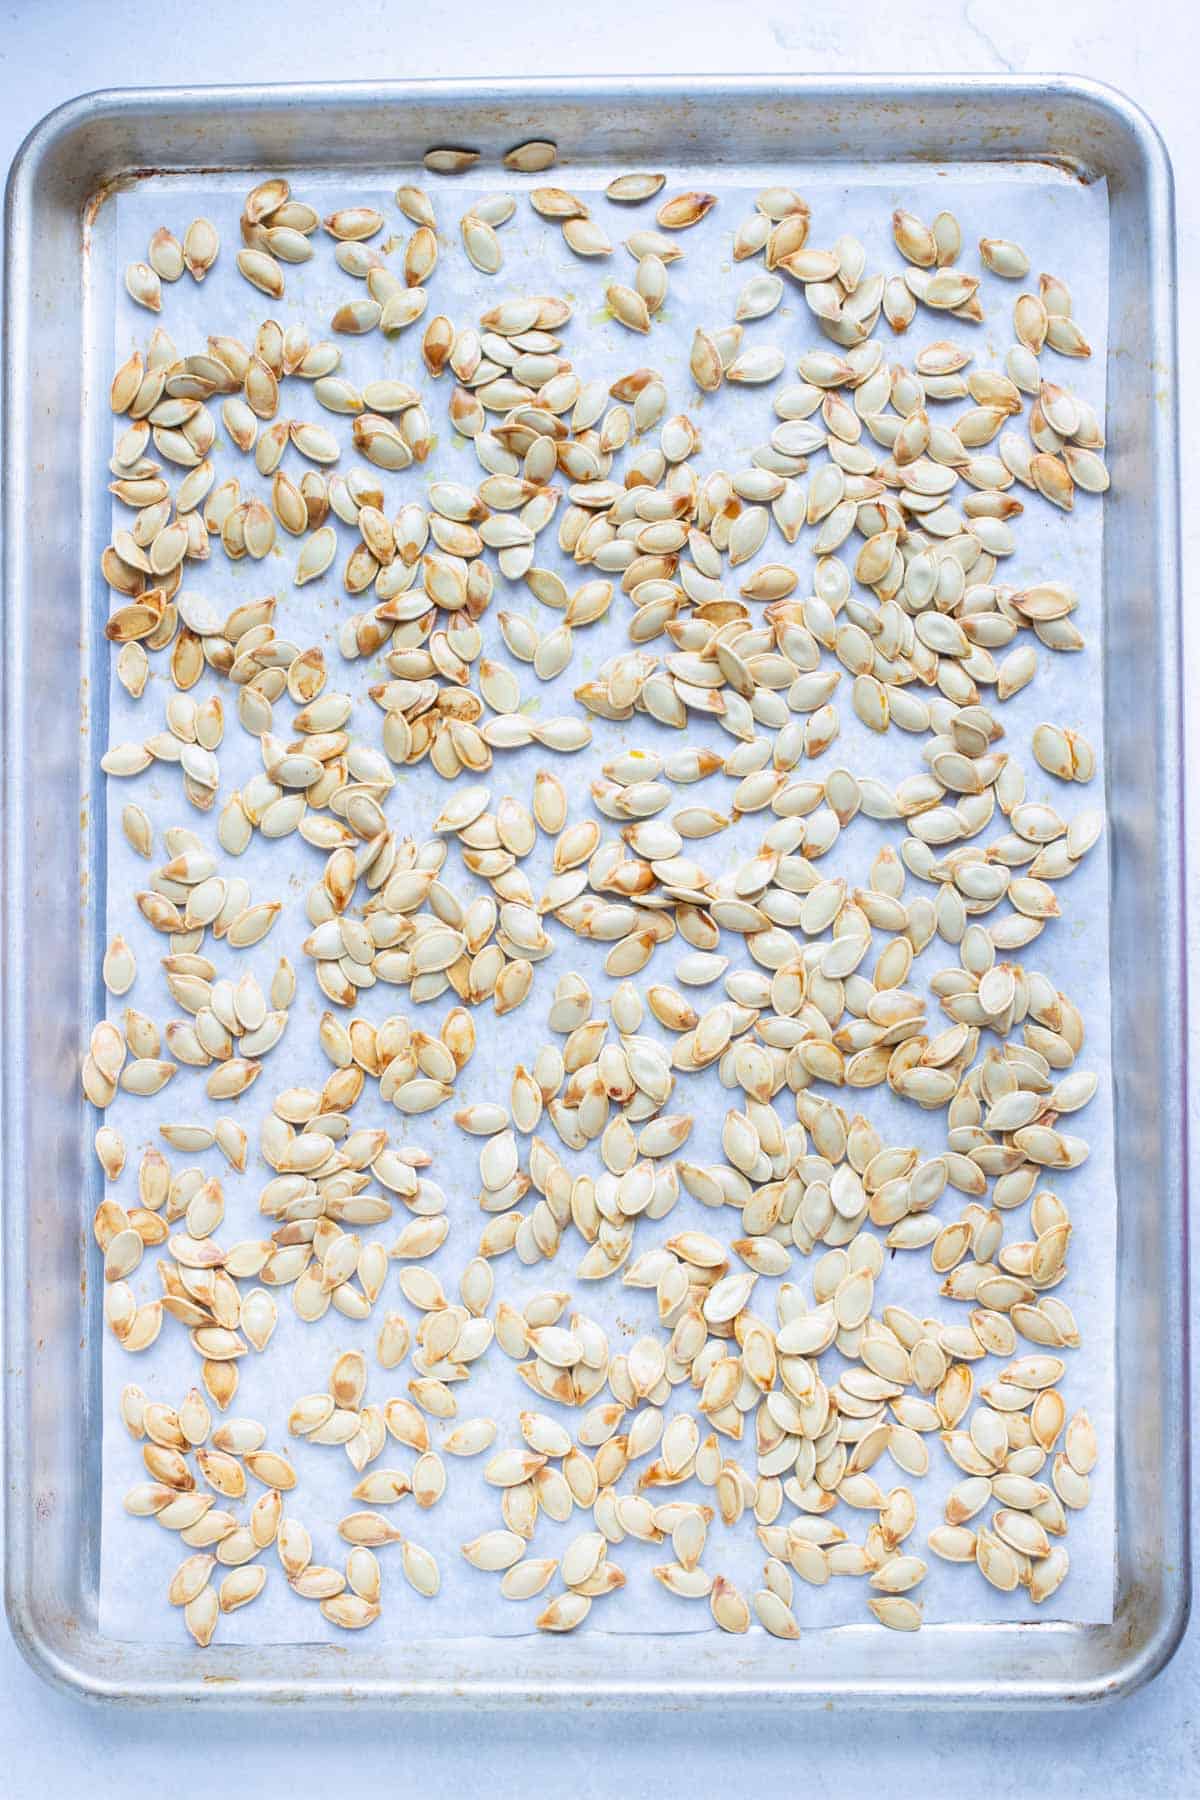 Toasted pumpkin seeds are baked in the oven.